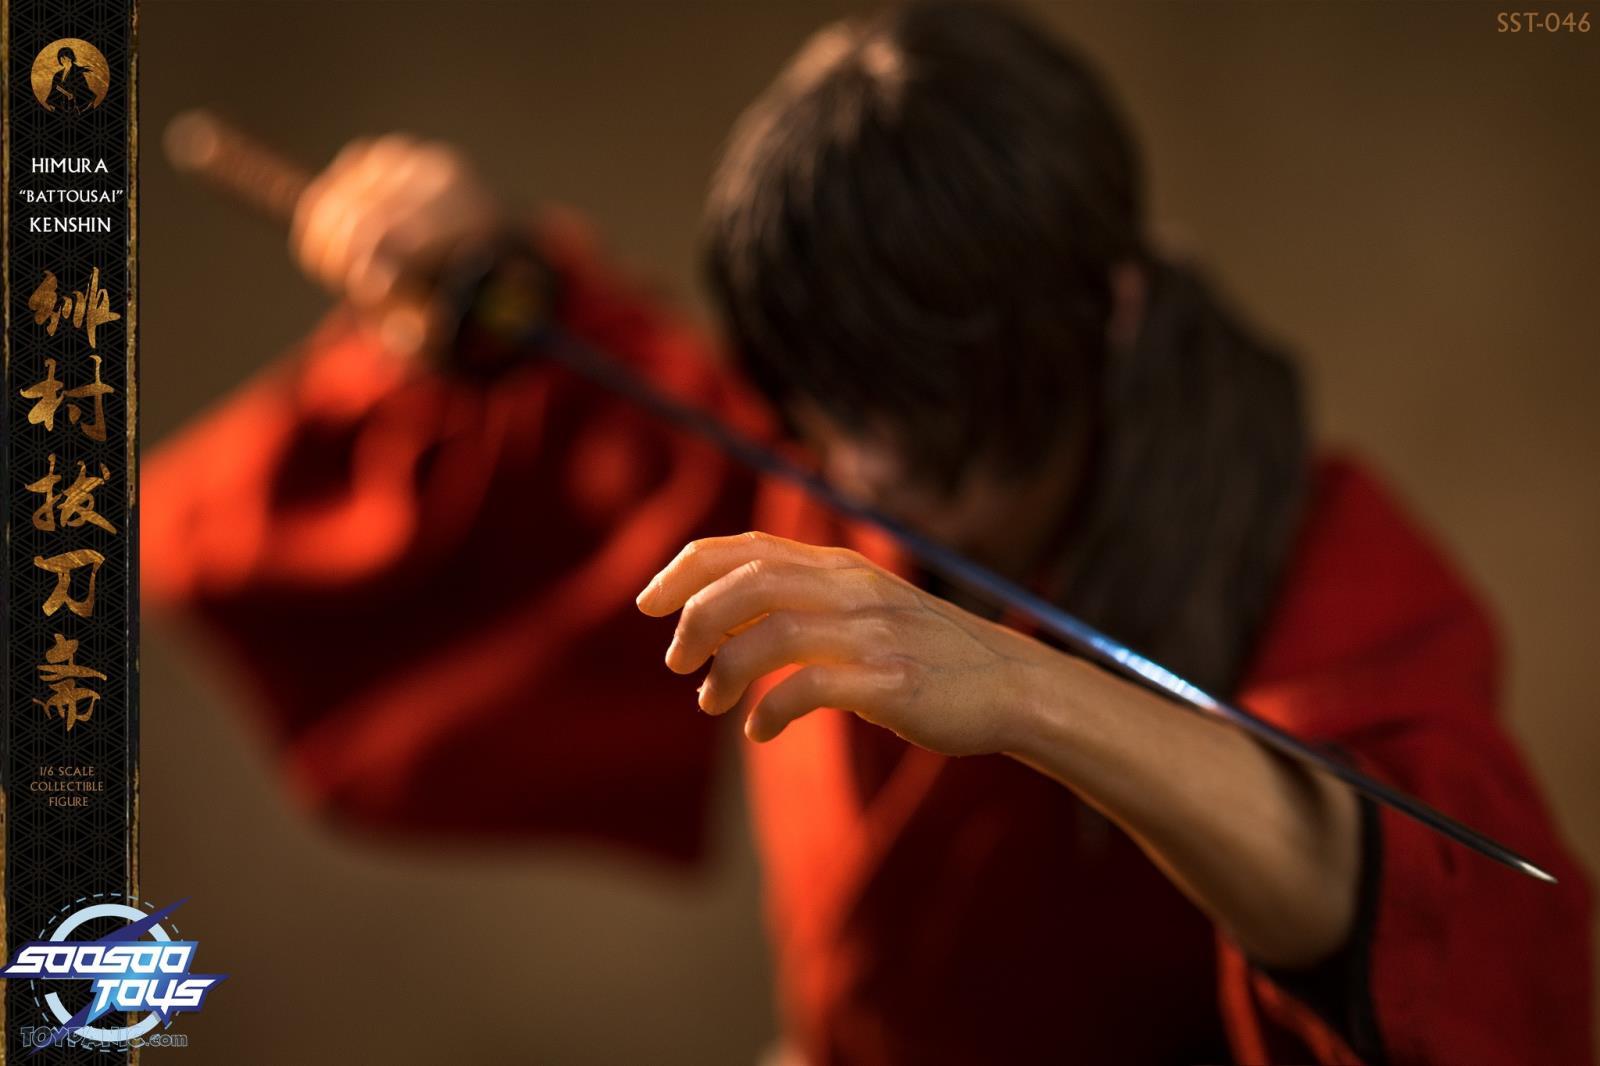 Japanese - NEW PRODUCT: 1/6 scale Rurouni Kenshin Collectible Figure from SooSooToys 712202251229PM_8652112